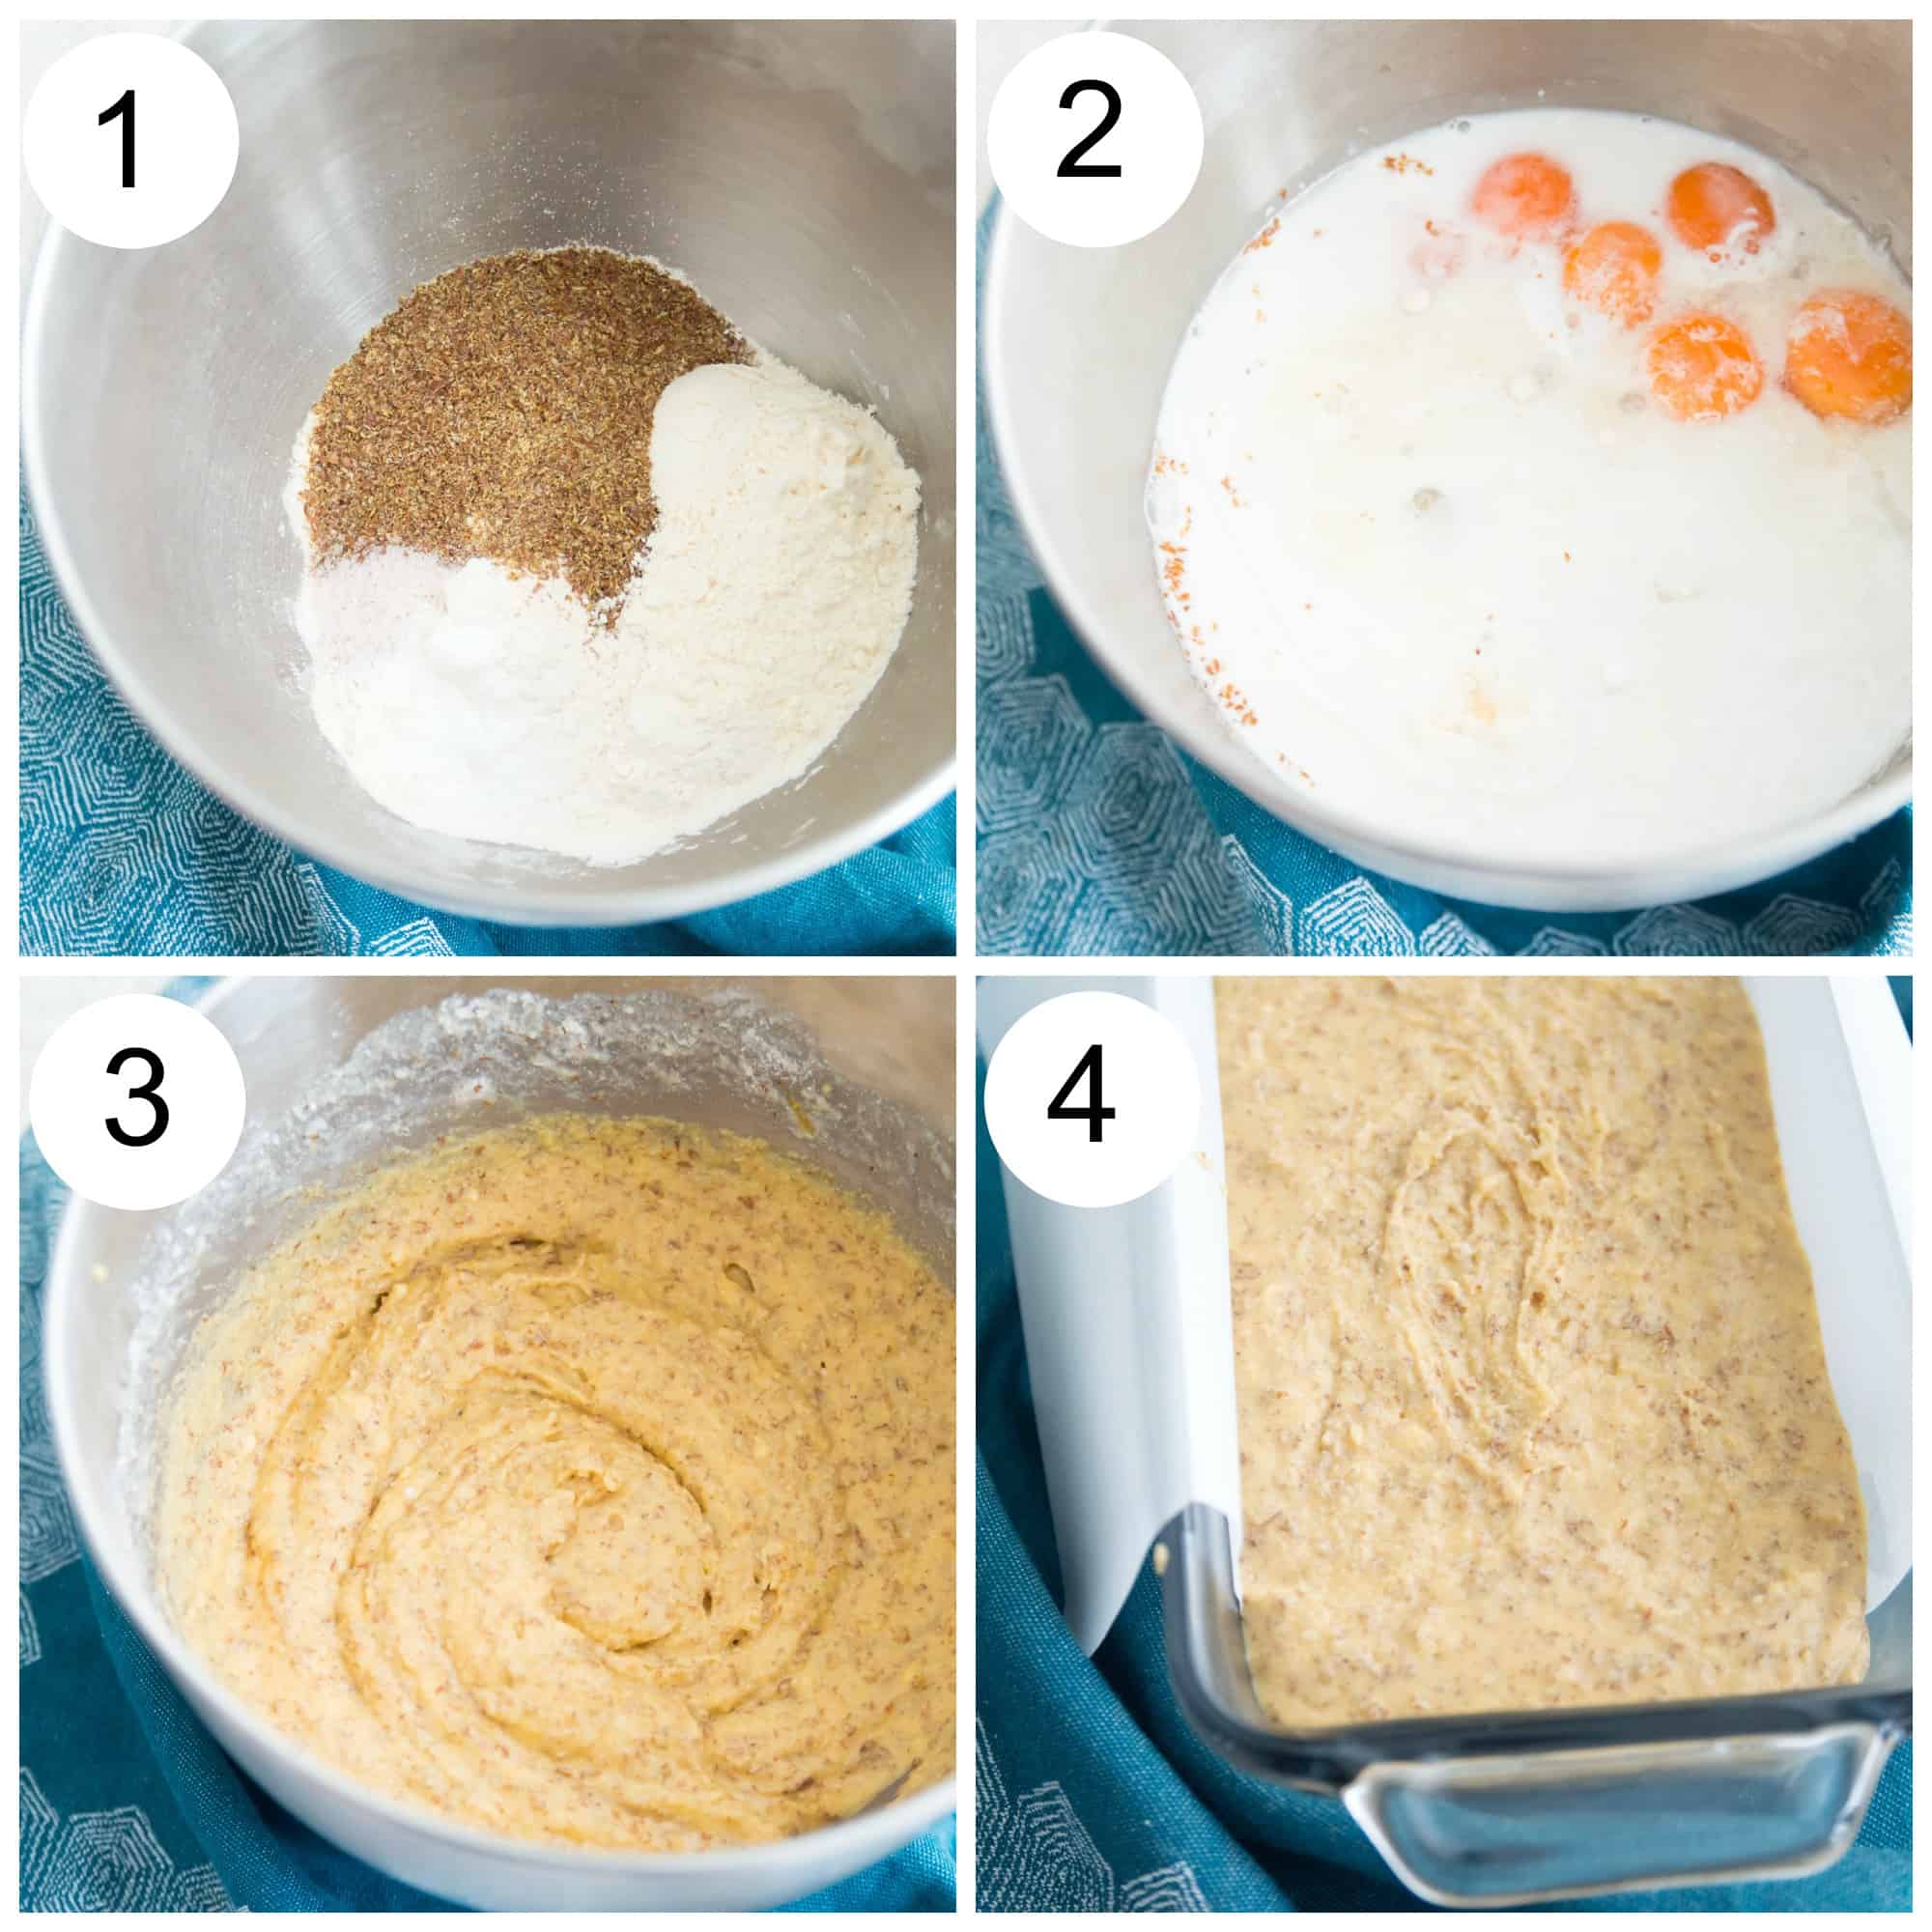 Step by step directions for making paleo bread.